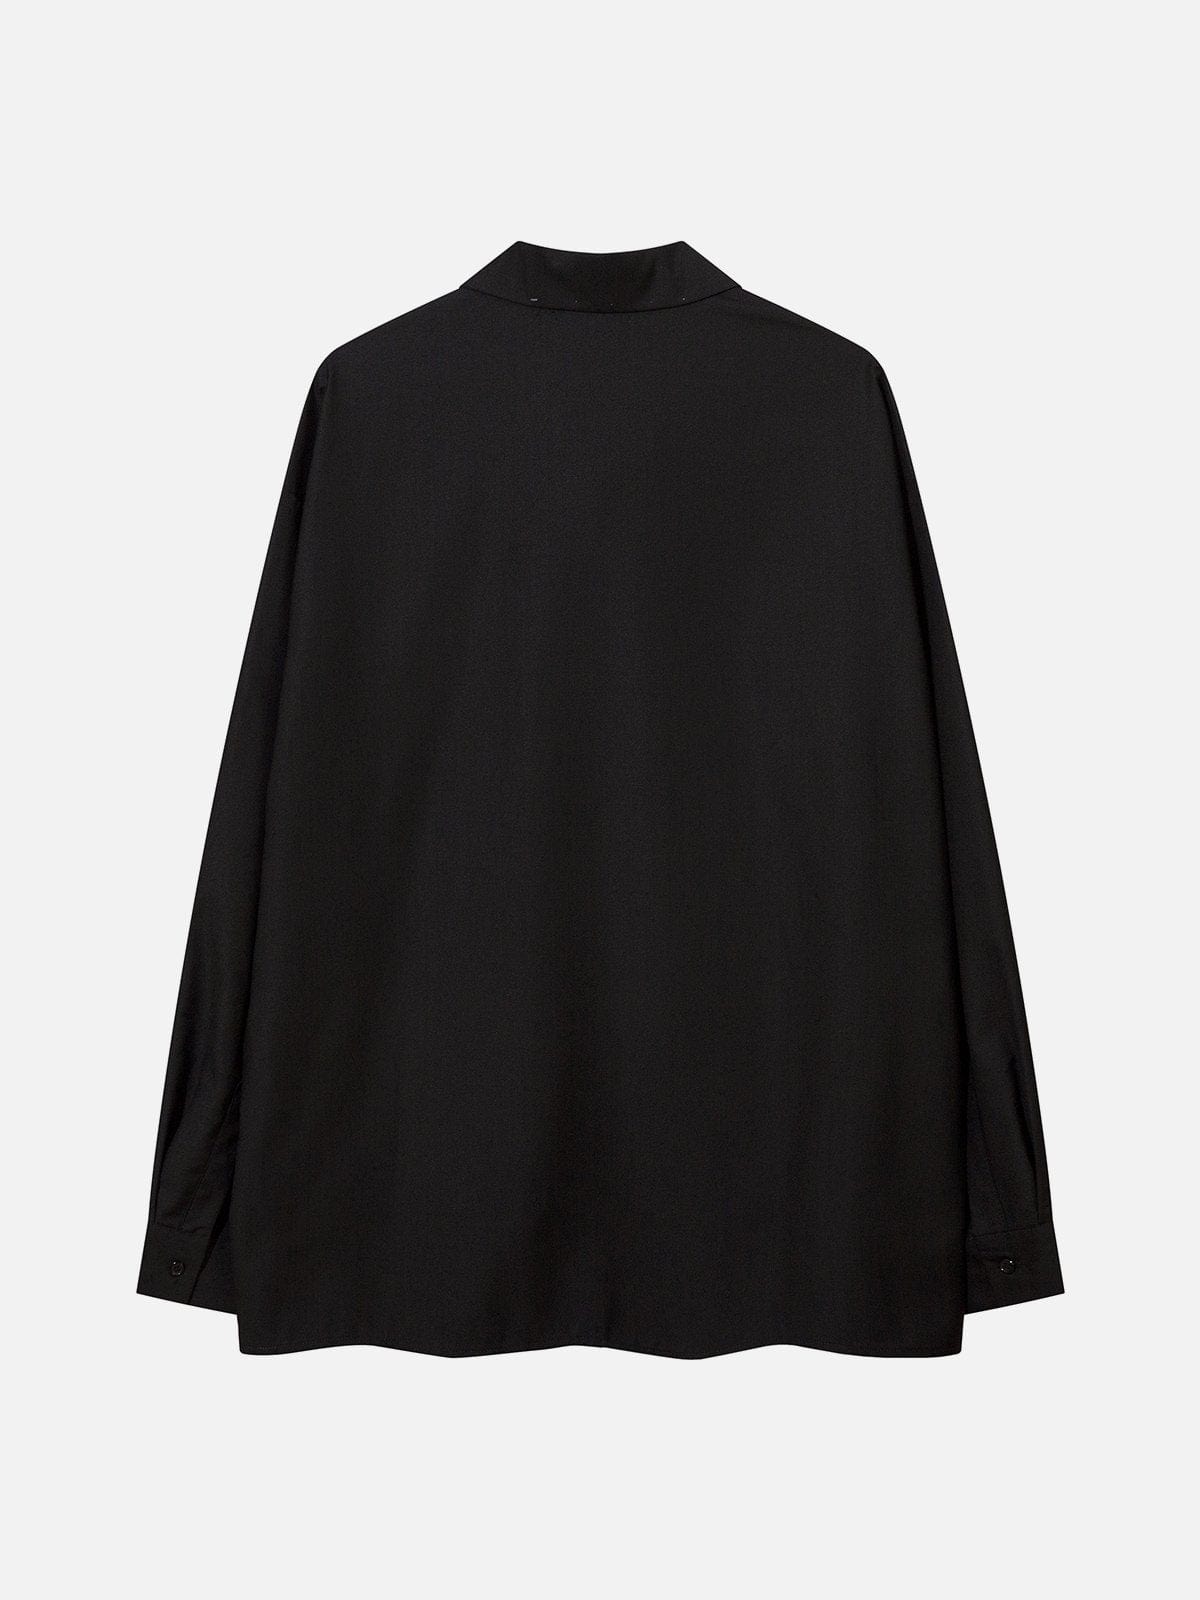 NEV Solid ZIP UP Long Sleeve Shirt